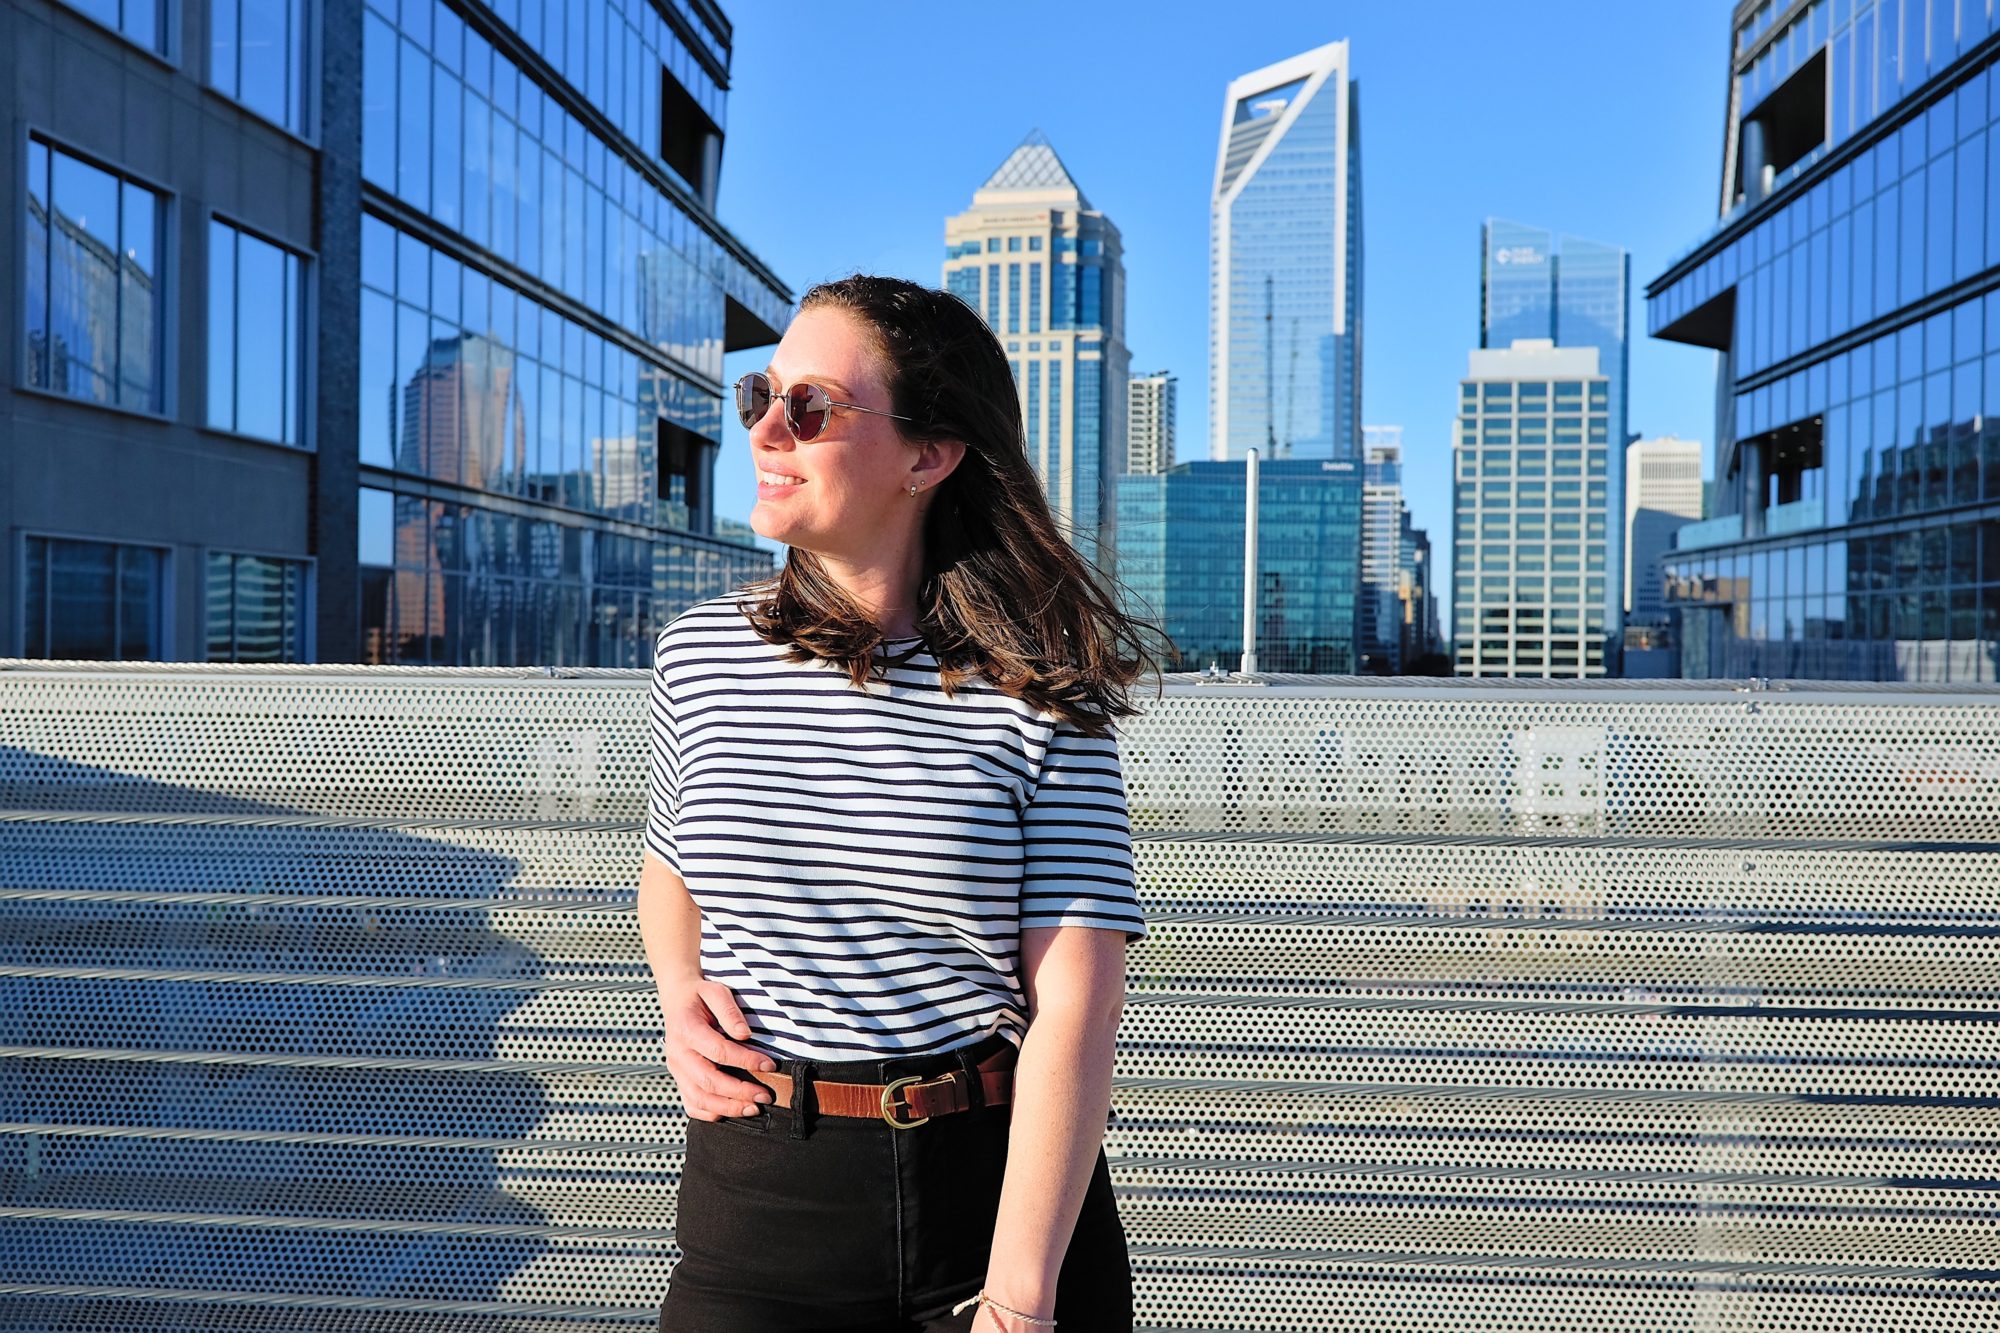 Alyssa wears the tee from ABLE and stands in front of the Charlotte skyline